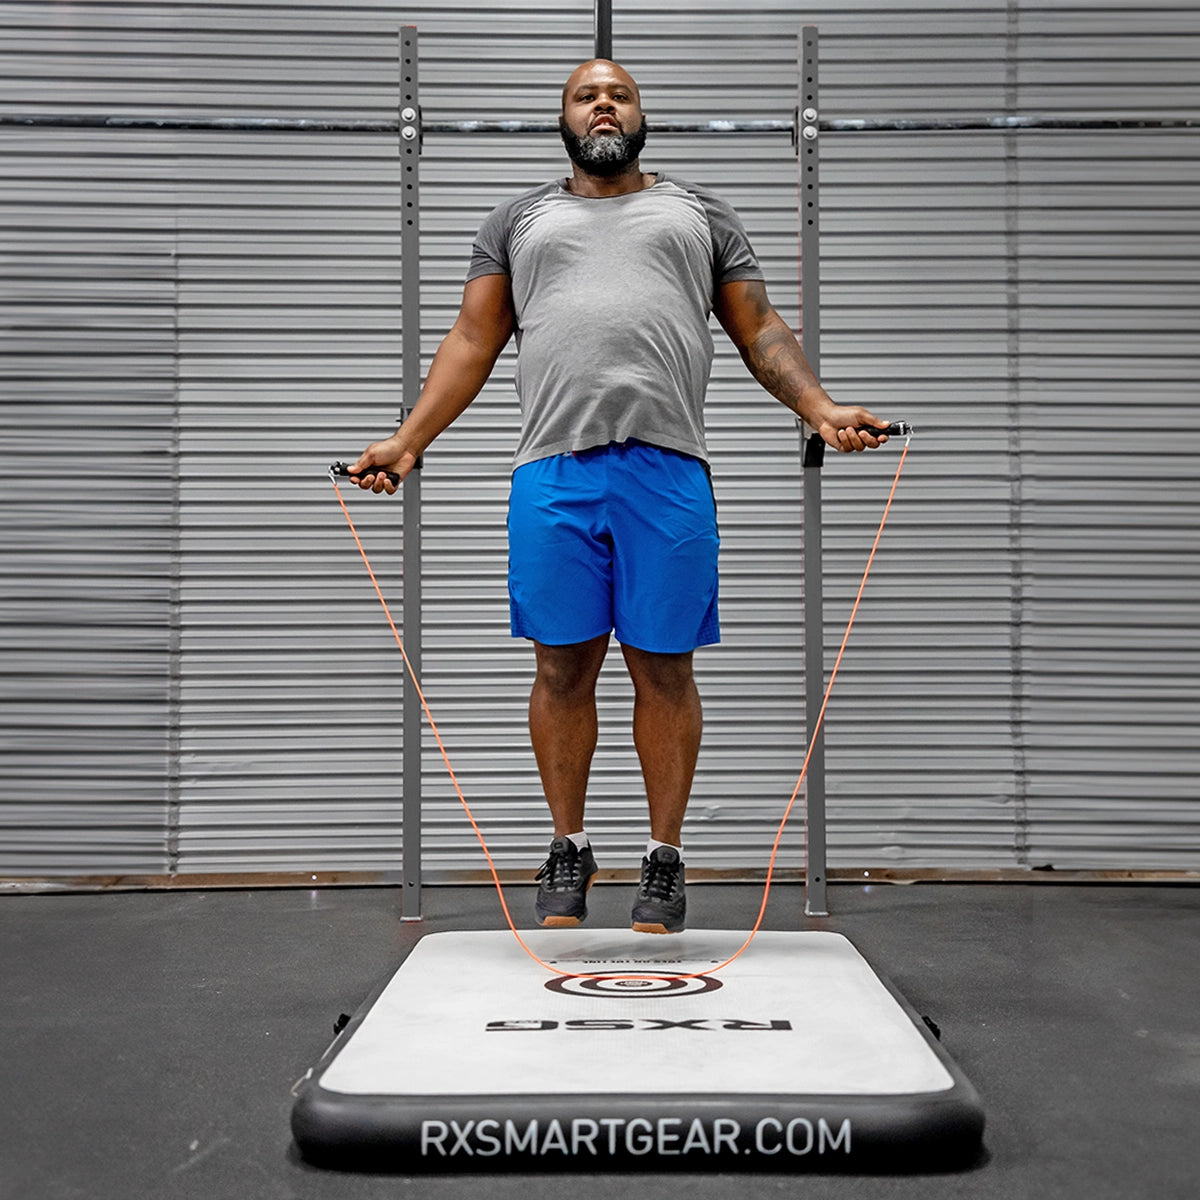 Rx Smart Gear Air Mat used to improve jump rope jumping skills